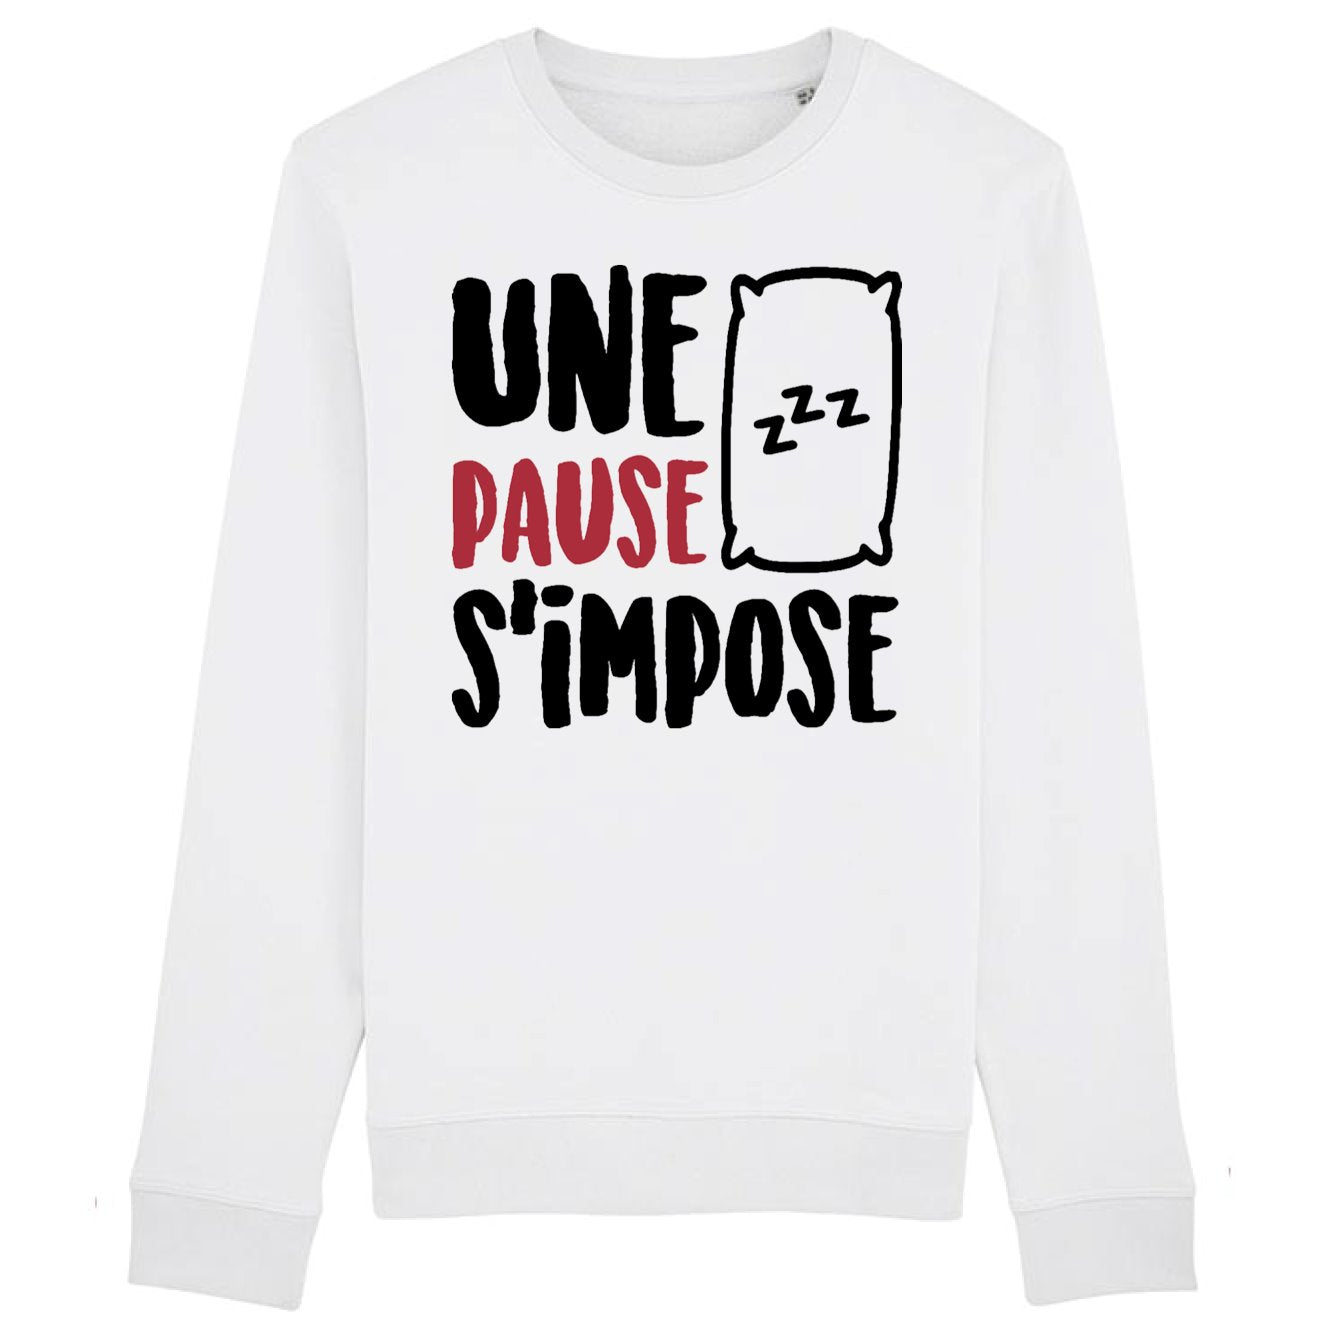 Sweat Adulte Une pause s'impose 